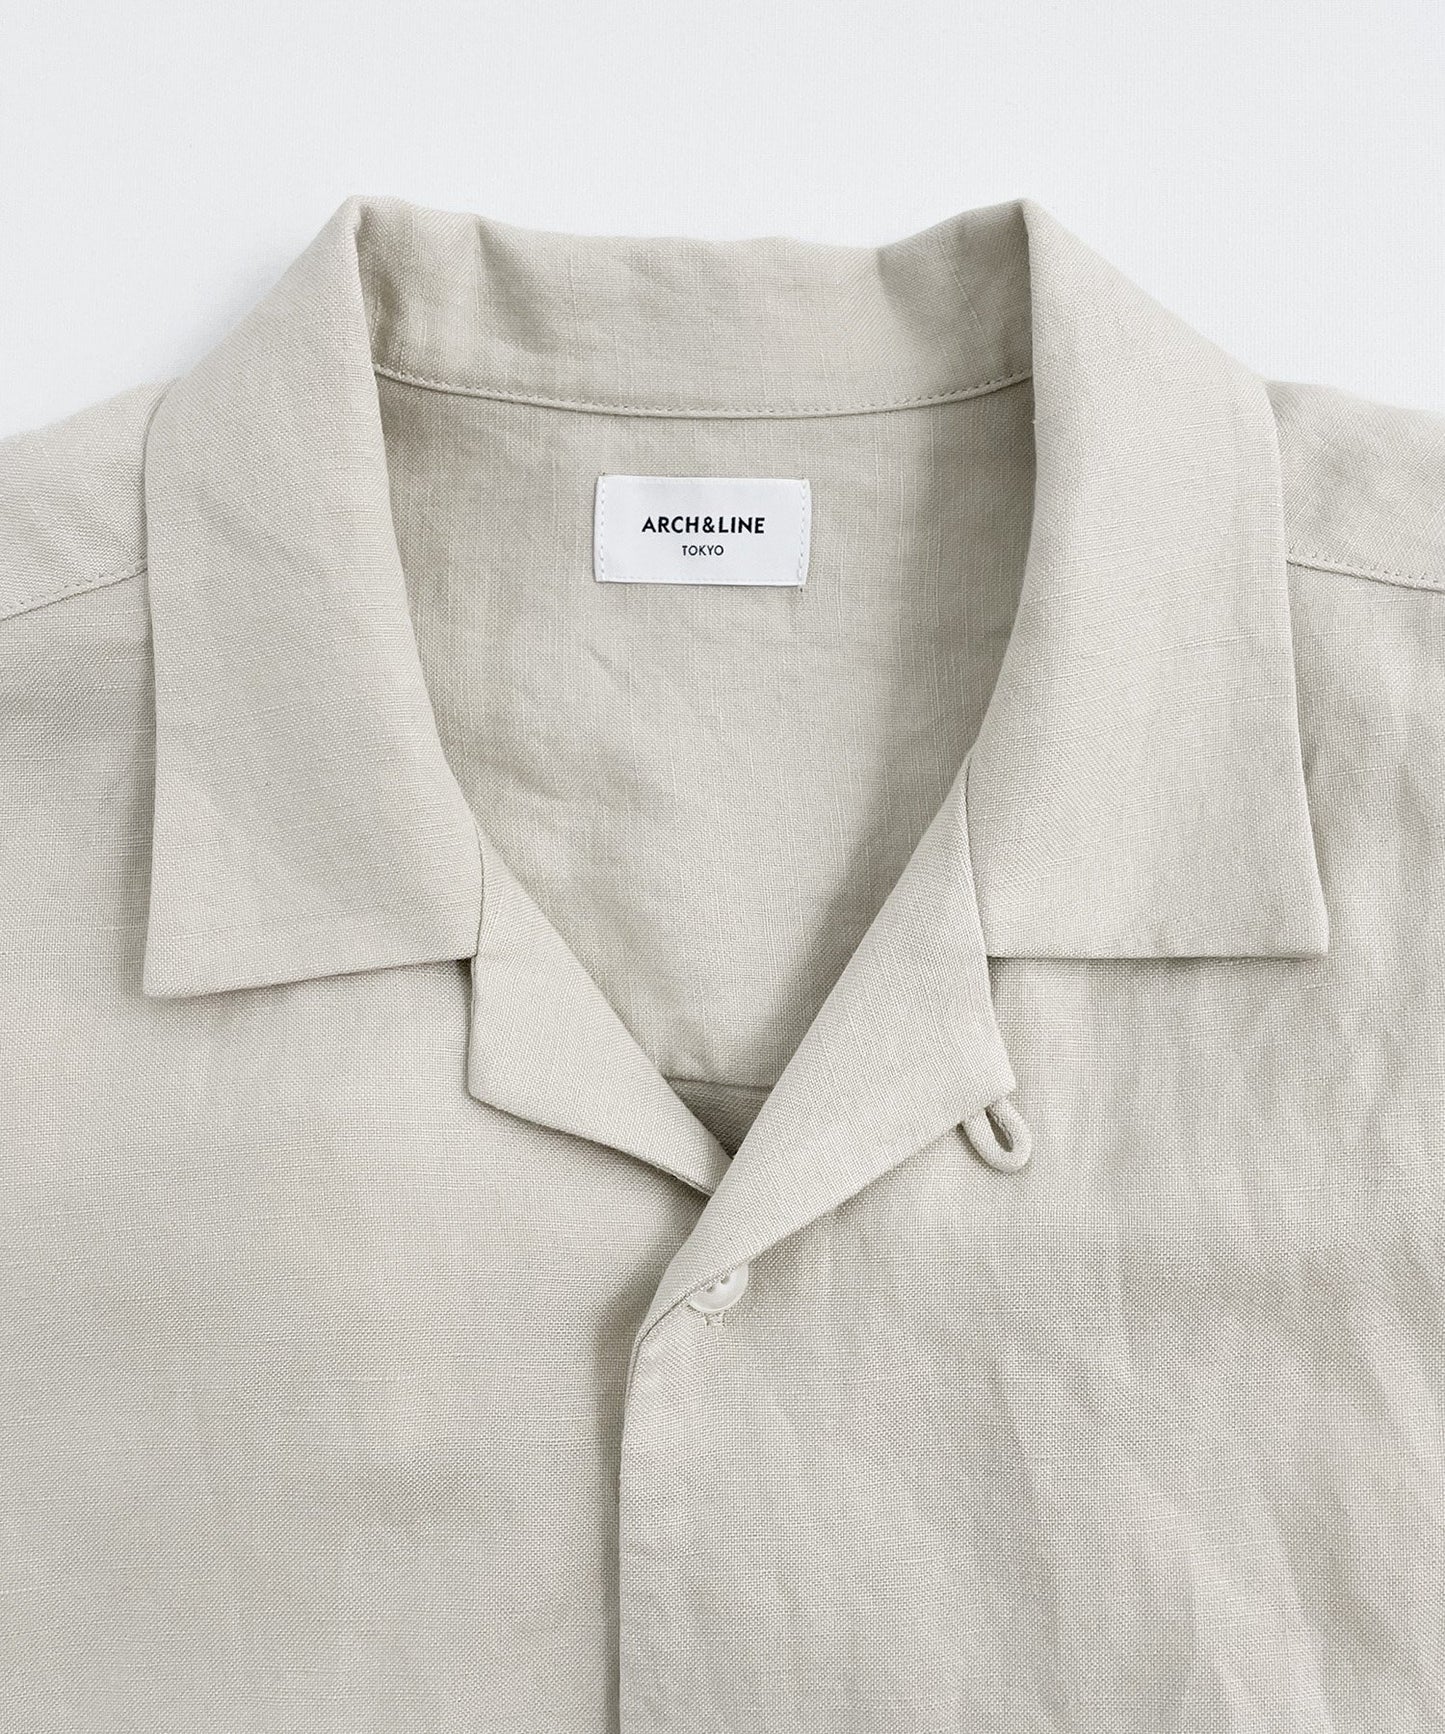 [Environmentally friendly material] LINEN/RAYON OPEN COLLAR SHIRT Cool touch feeling On/off use Setup compatible [145-175cm]